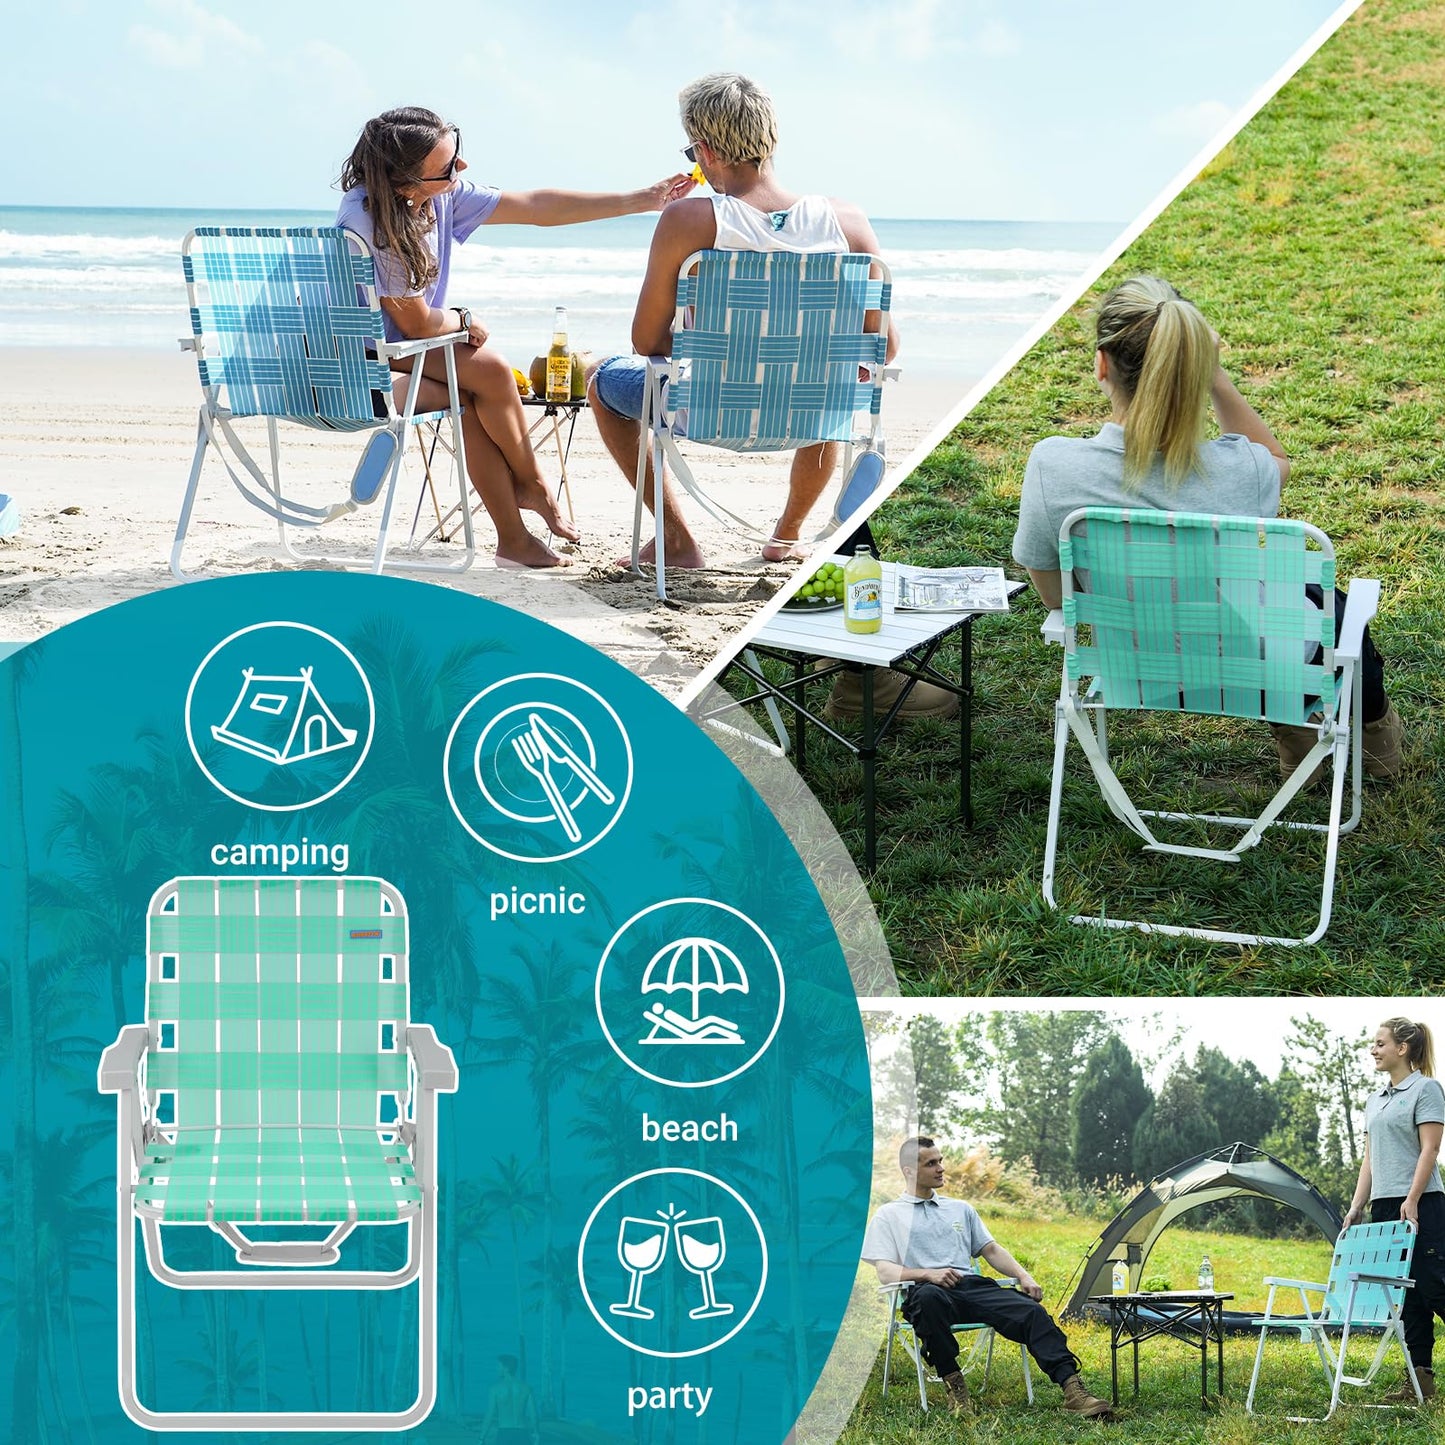 WEJOY Folding Oversized 17-In High back Webbed Lawn Beach Chair